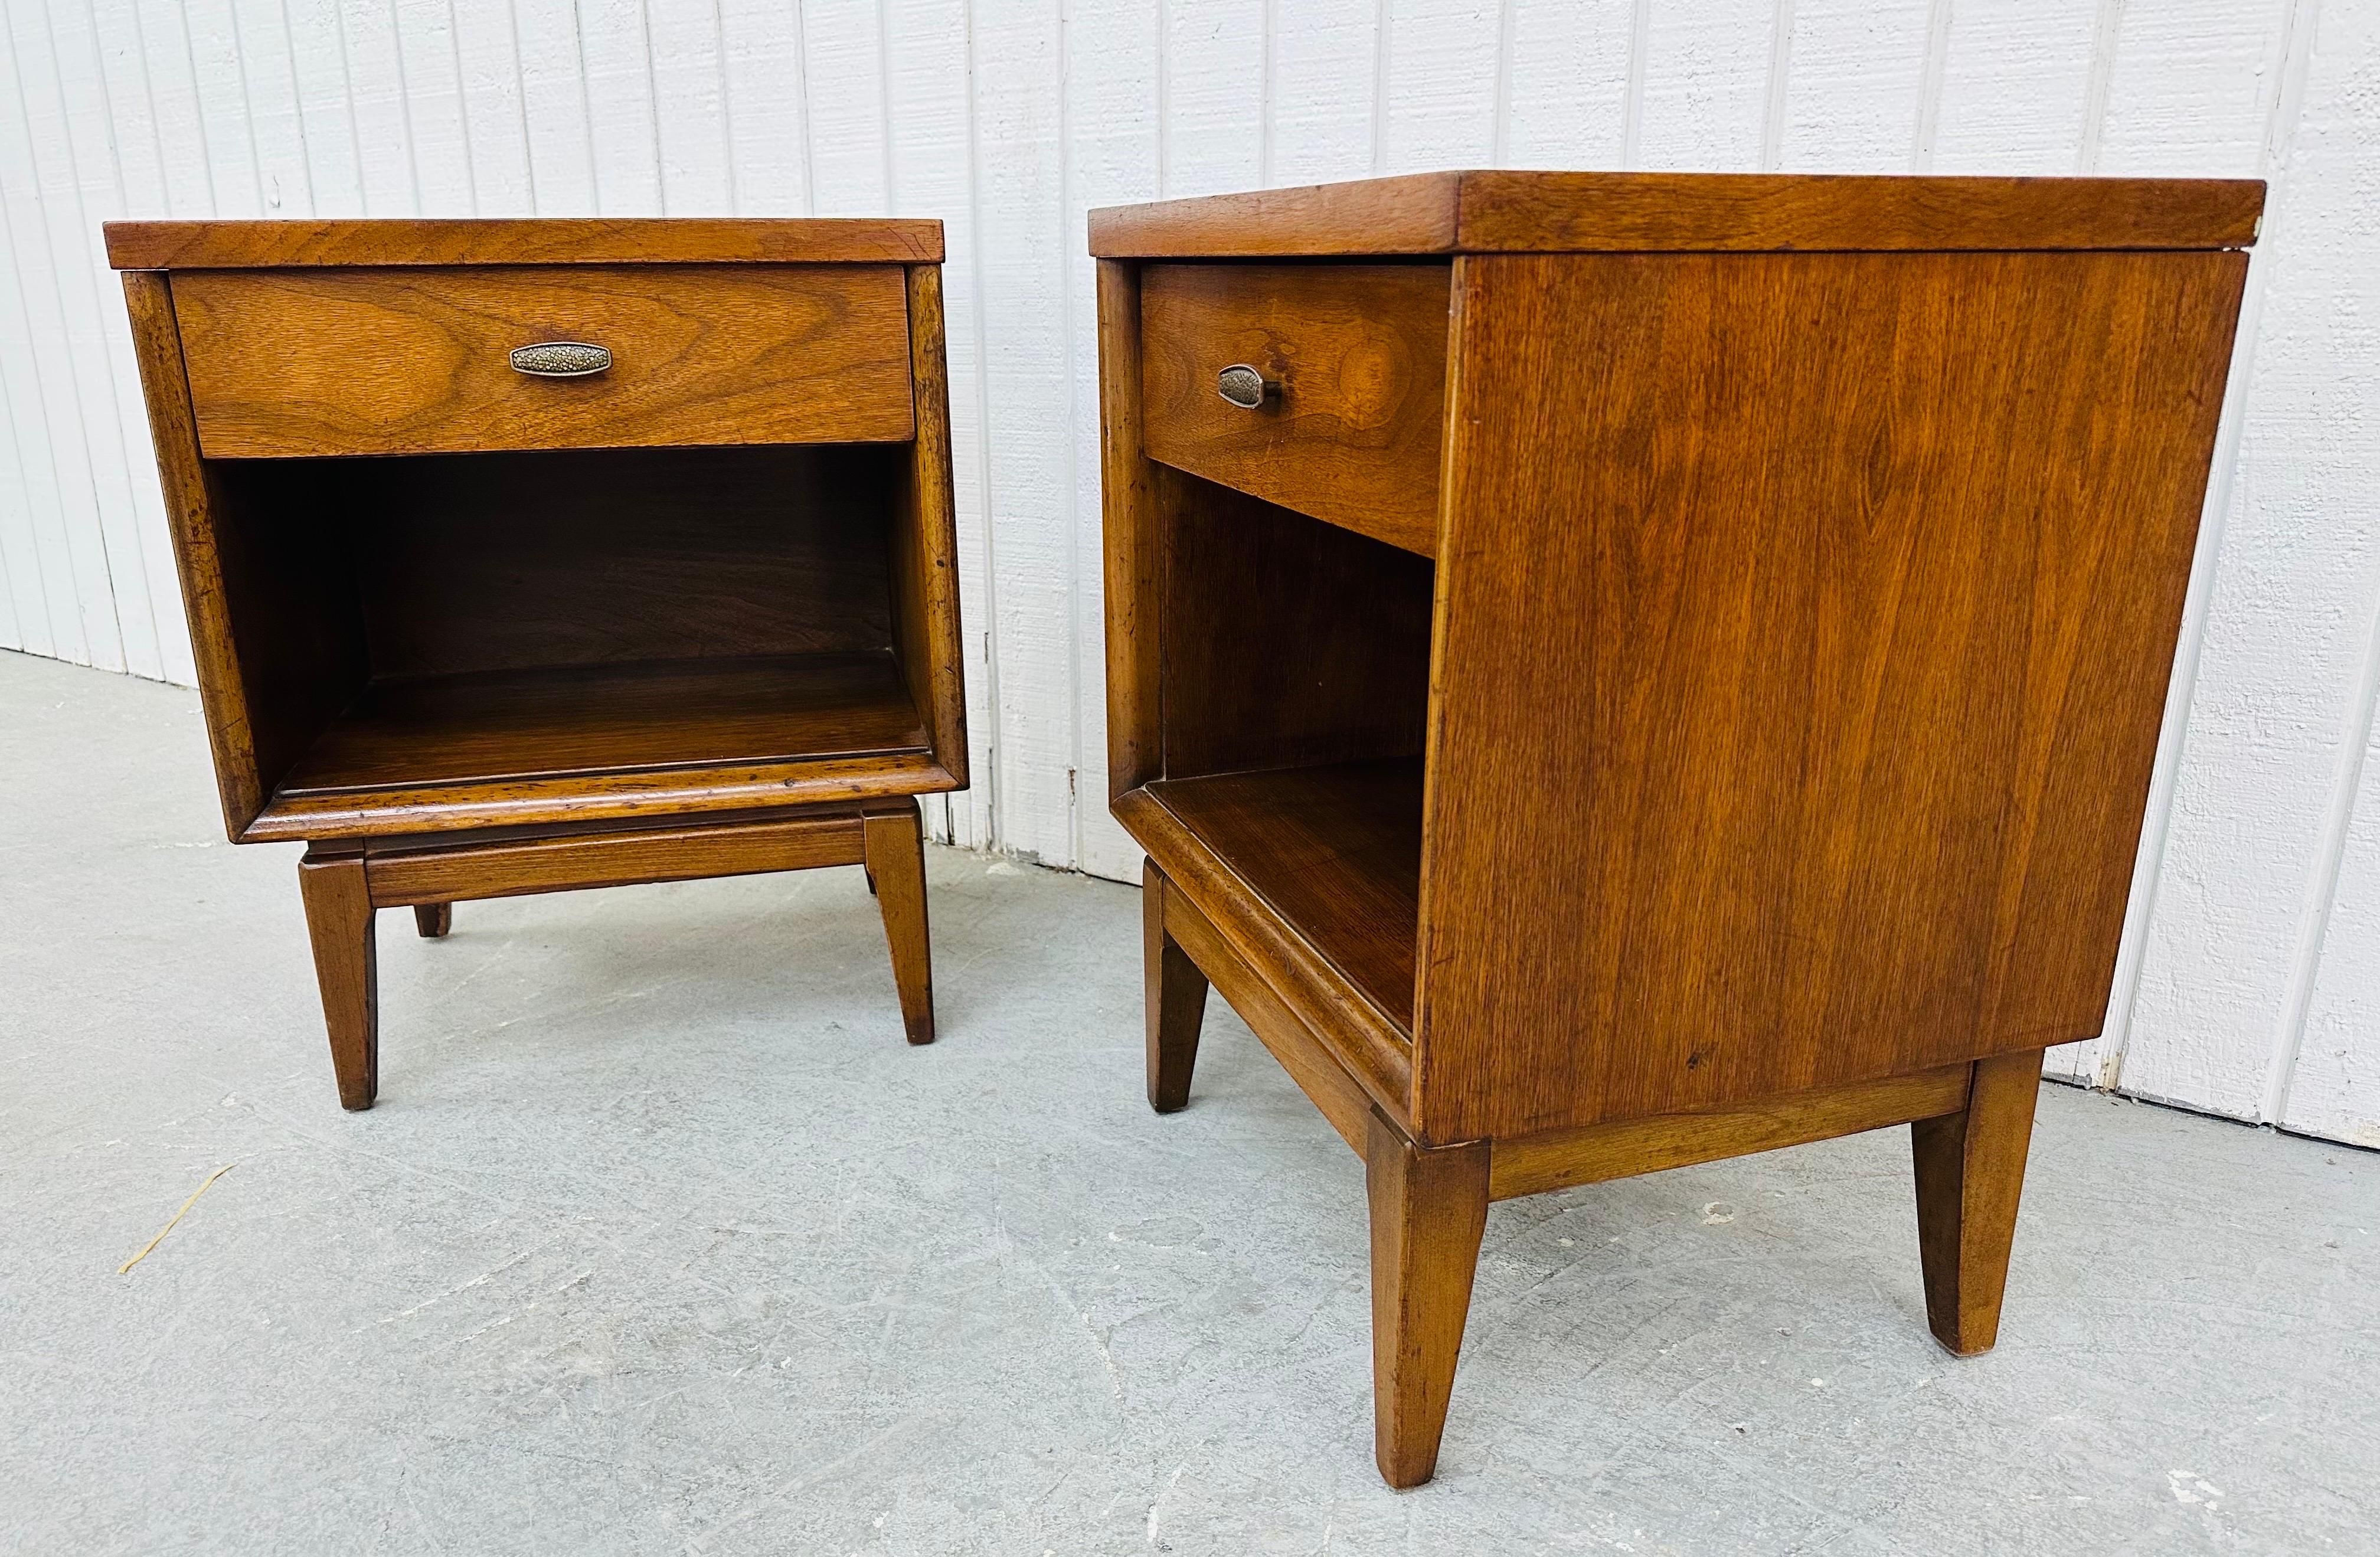 This listing is for a pair of Mid-Century Modern Walnut Nightstands. Featuring a straight line design, single drawer with original hardware, open storage space, modern legs, and a beautiful walnut finish. This is an exceptional combination of